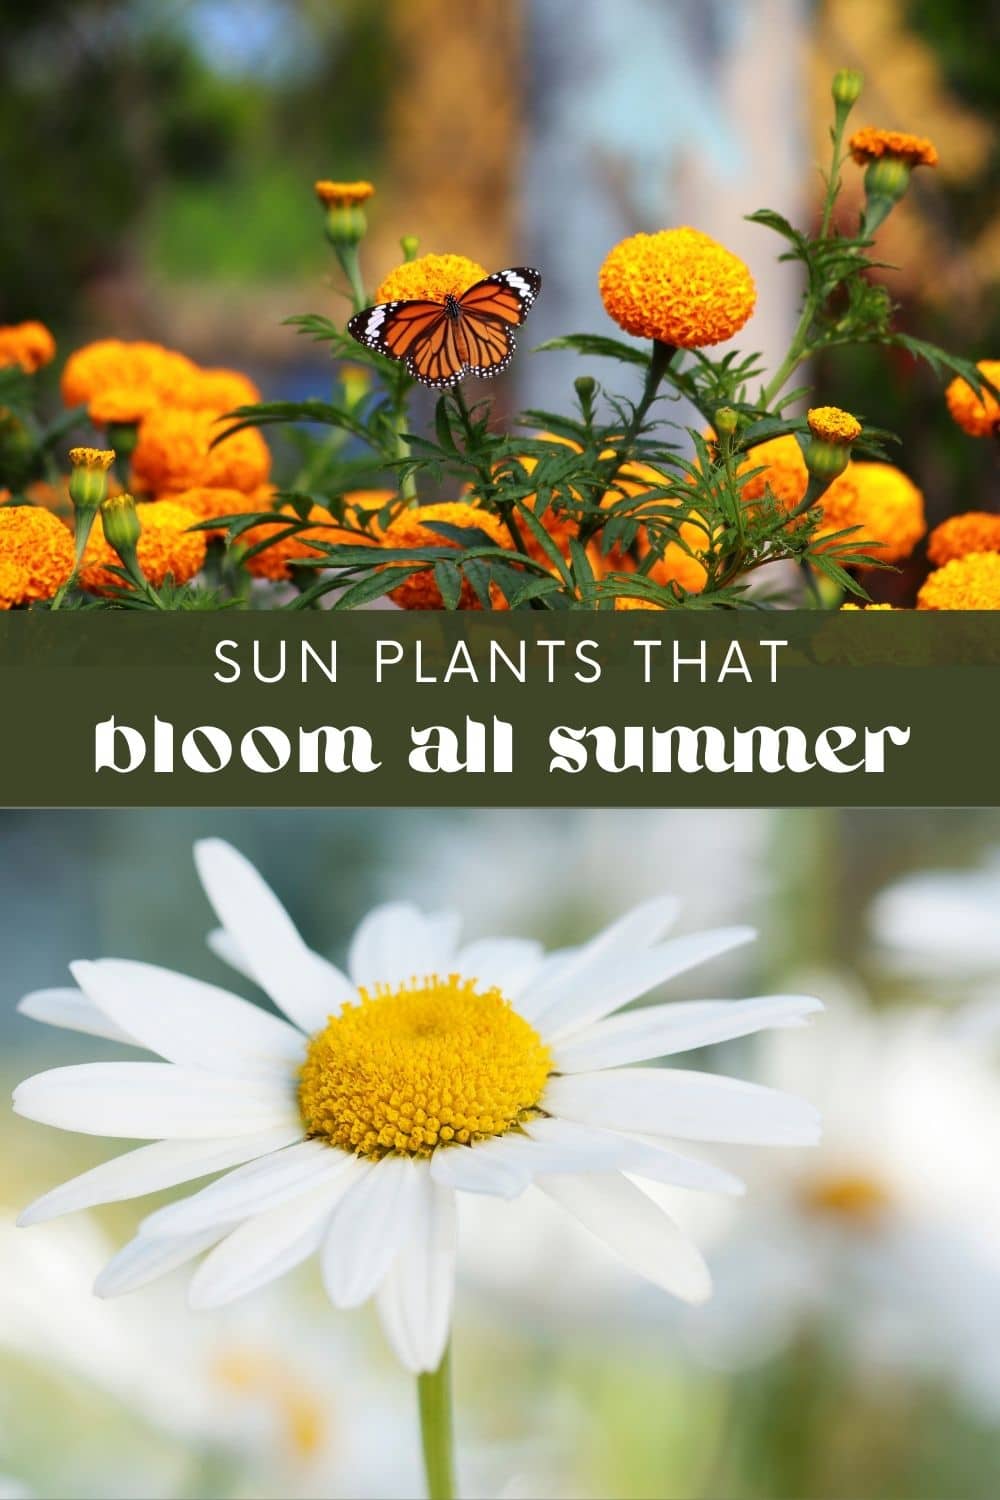 There's nothing quite like a beautiful garden filled with colorful and long-lasting flowers - especially during the summer months. If you want to create a garden that will bloom all summer, planting sun-loving perennials and annuals can help achieve this goal!